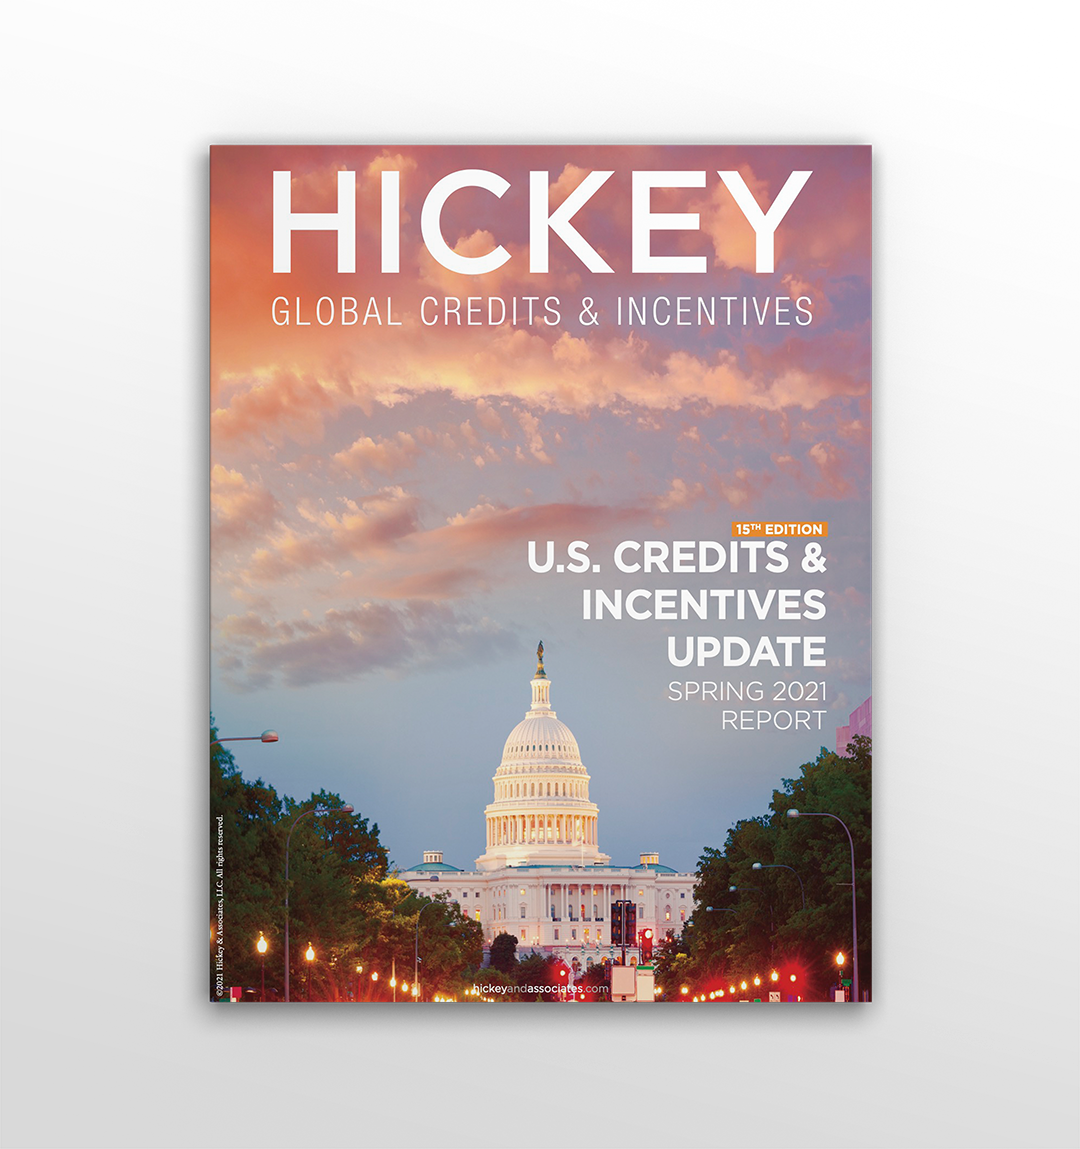 Hickey Releases Report on Incentives in the US